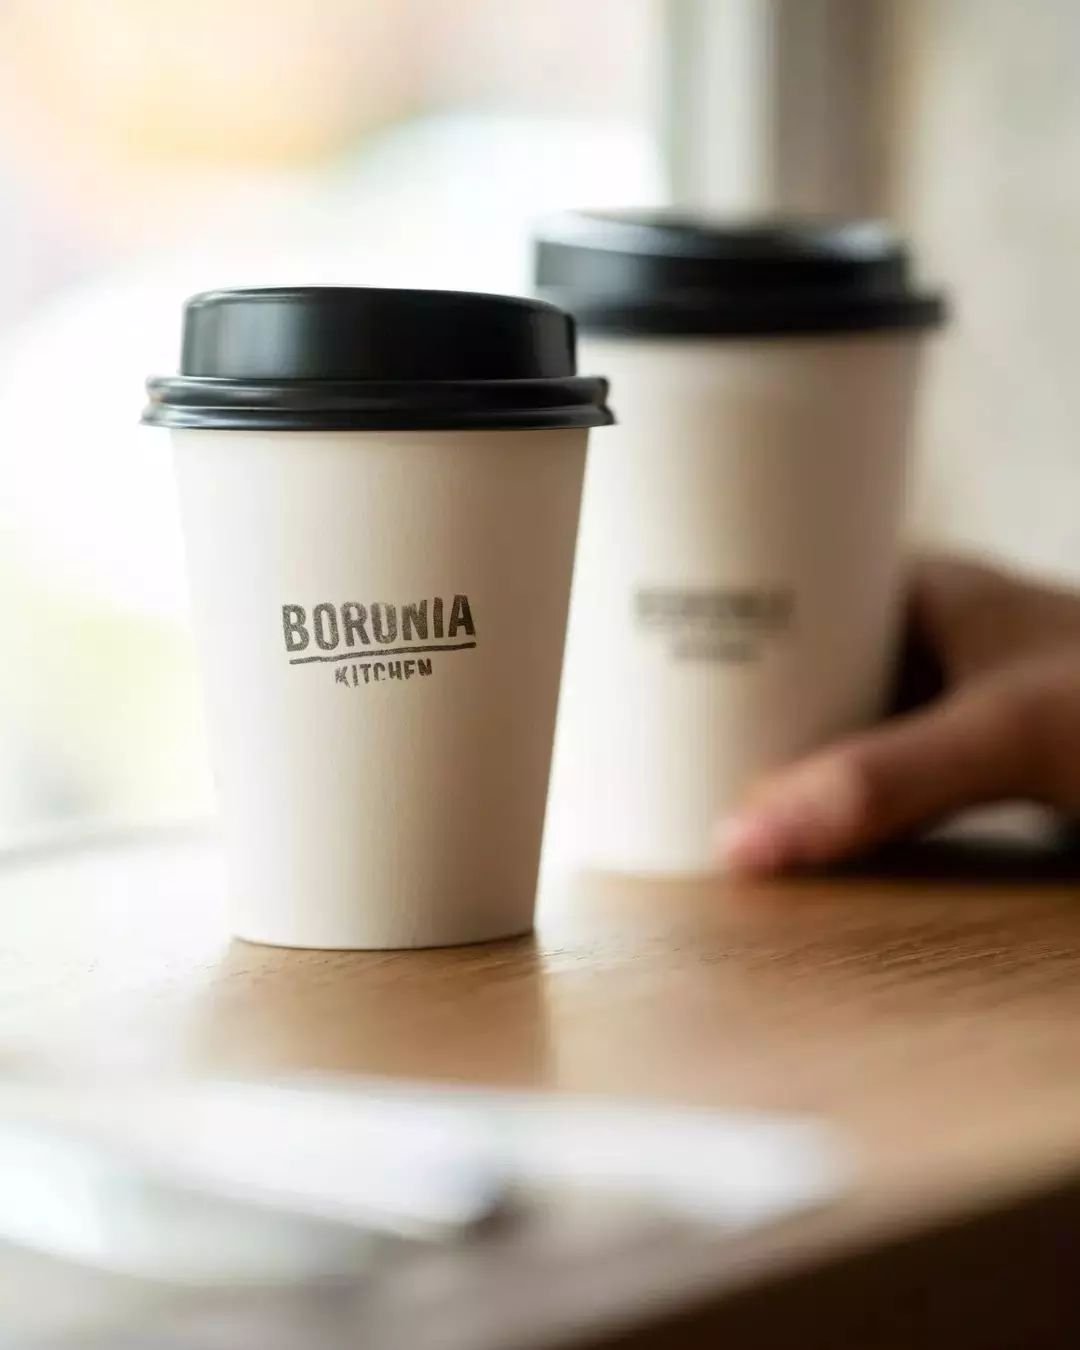 Caffeine + Boronia Kitchen = The perfect morning combo ☕

Open from 8am Wednesday to Sunday.